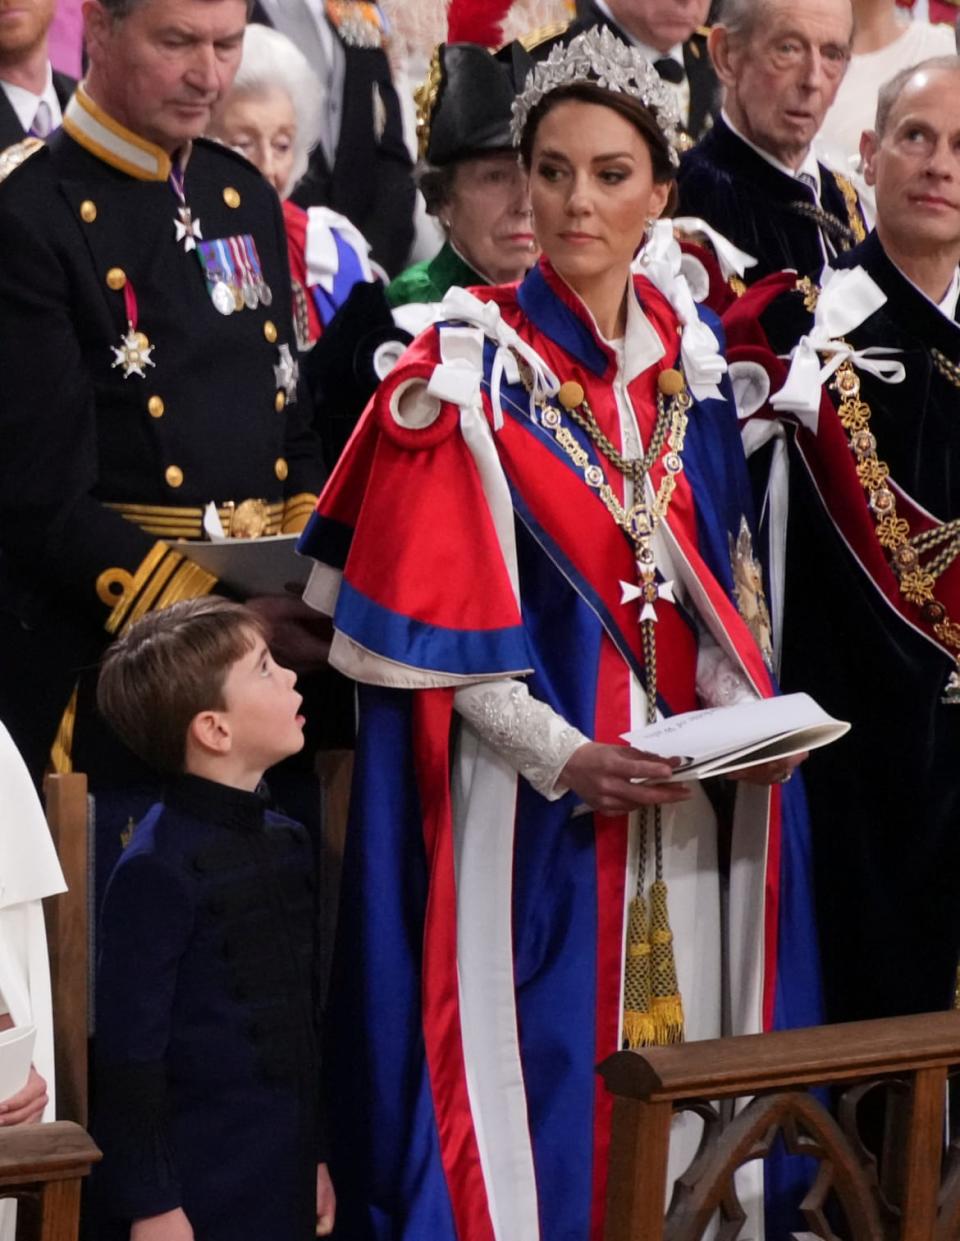 <div class="inline-image__caption"><p>Prince Louis and the Princess of Wales at the coronation ceremony of King Charles III and Queen Camilla in Westminster Abbey, London. Picture date: Saturday May 6, 2023.</p></div> <div class="inline-image__credit">Victoria Jones/Pool via REUTERS</div>